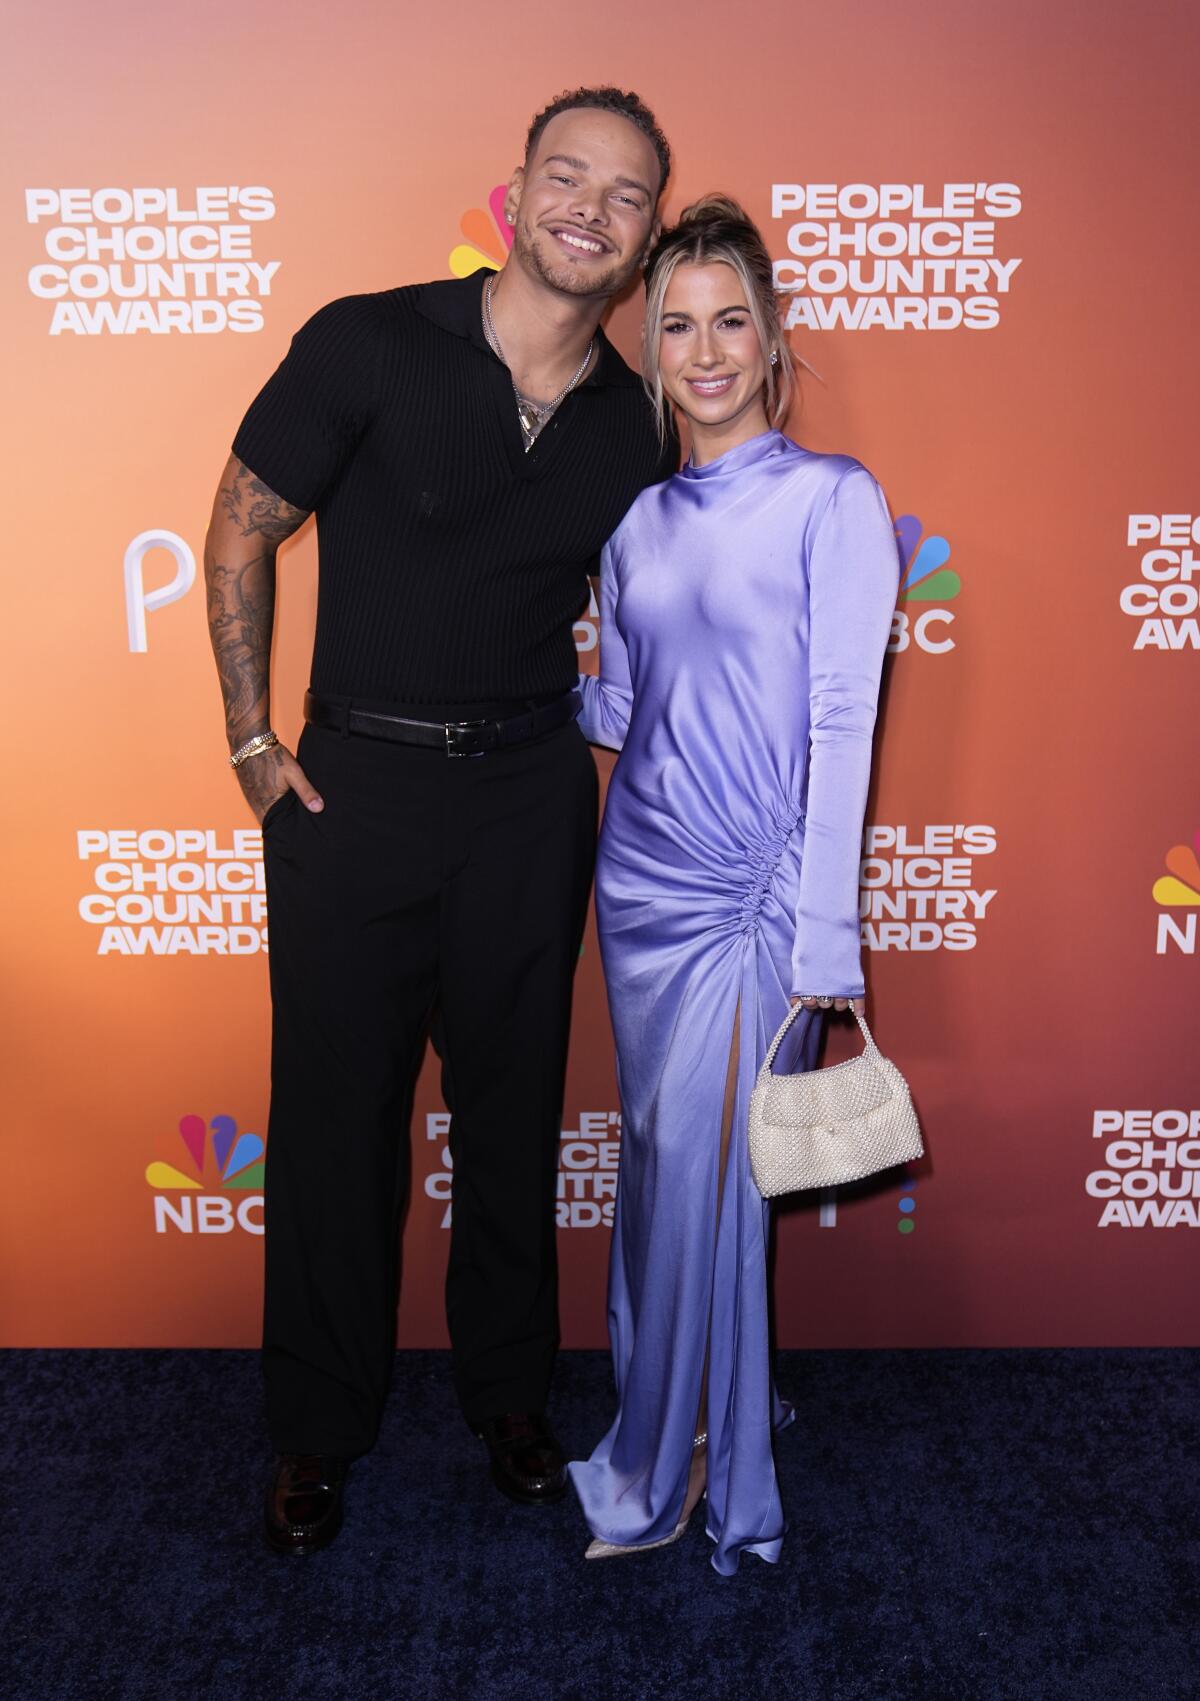 Kane Brown wears a black shirt and pants and Katelyn Brown wears a long-sleeved lavender gown as they pose for photos 